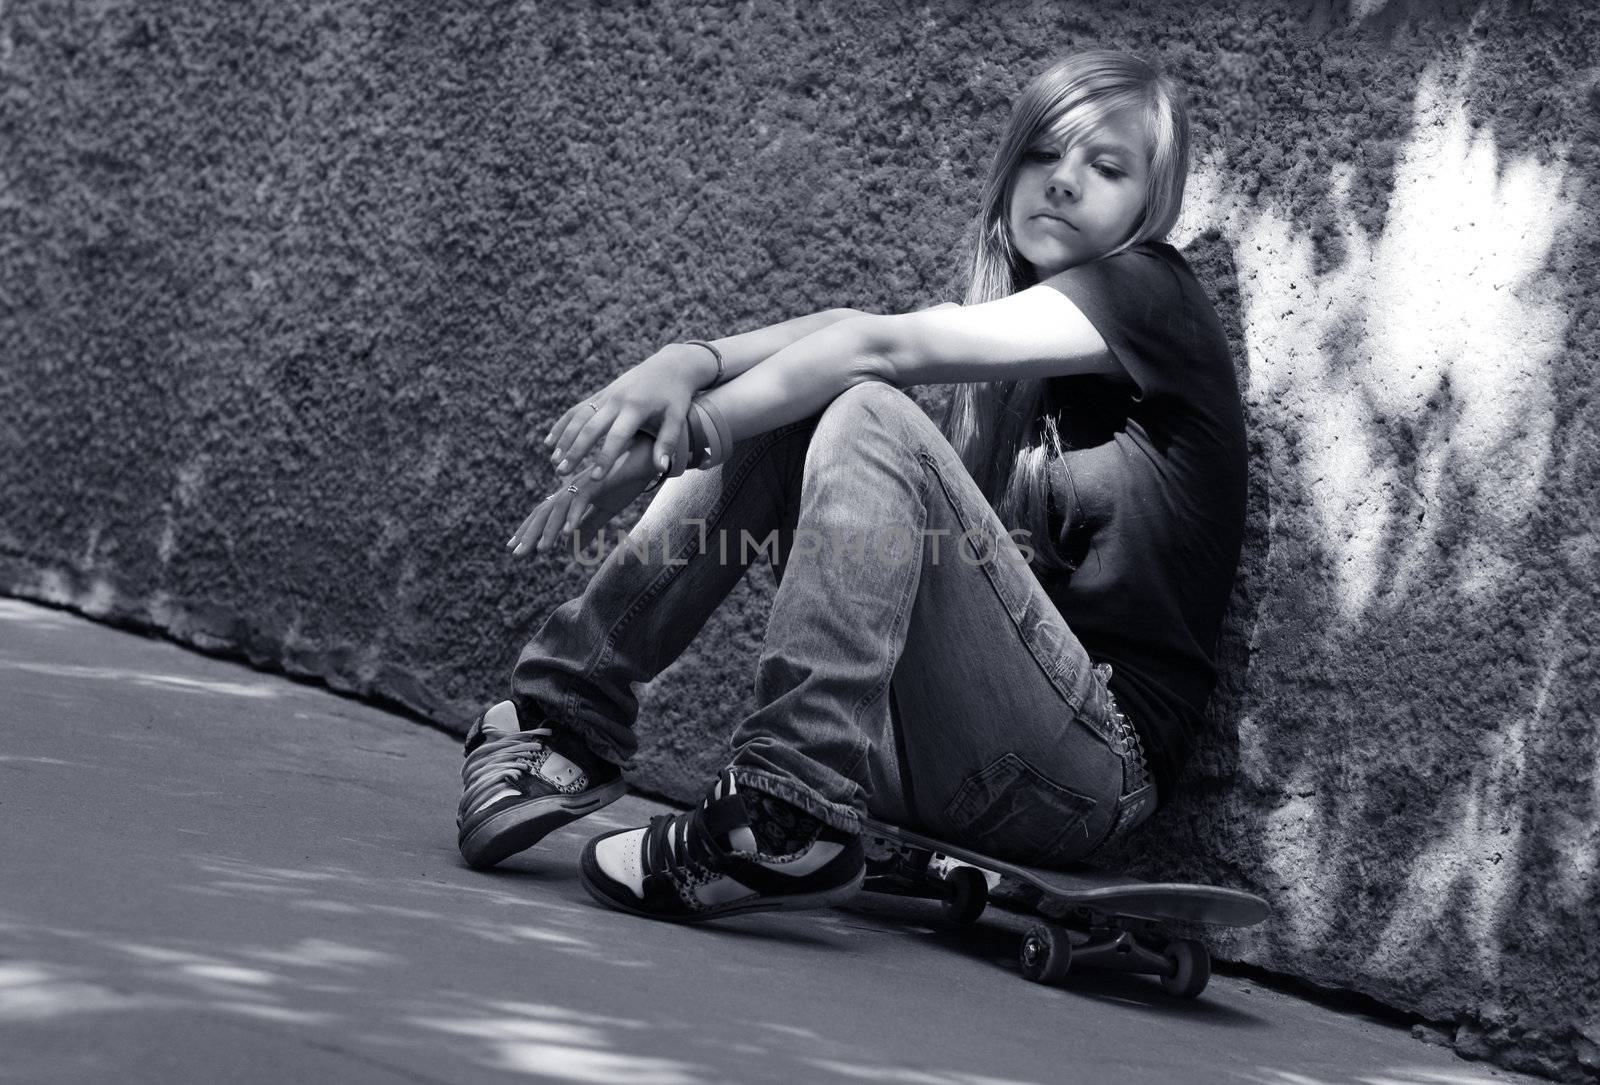 The girl with skateboard sitting against a wall. Shadow on a wall as a wing